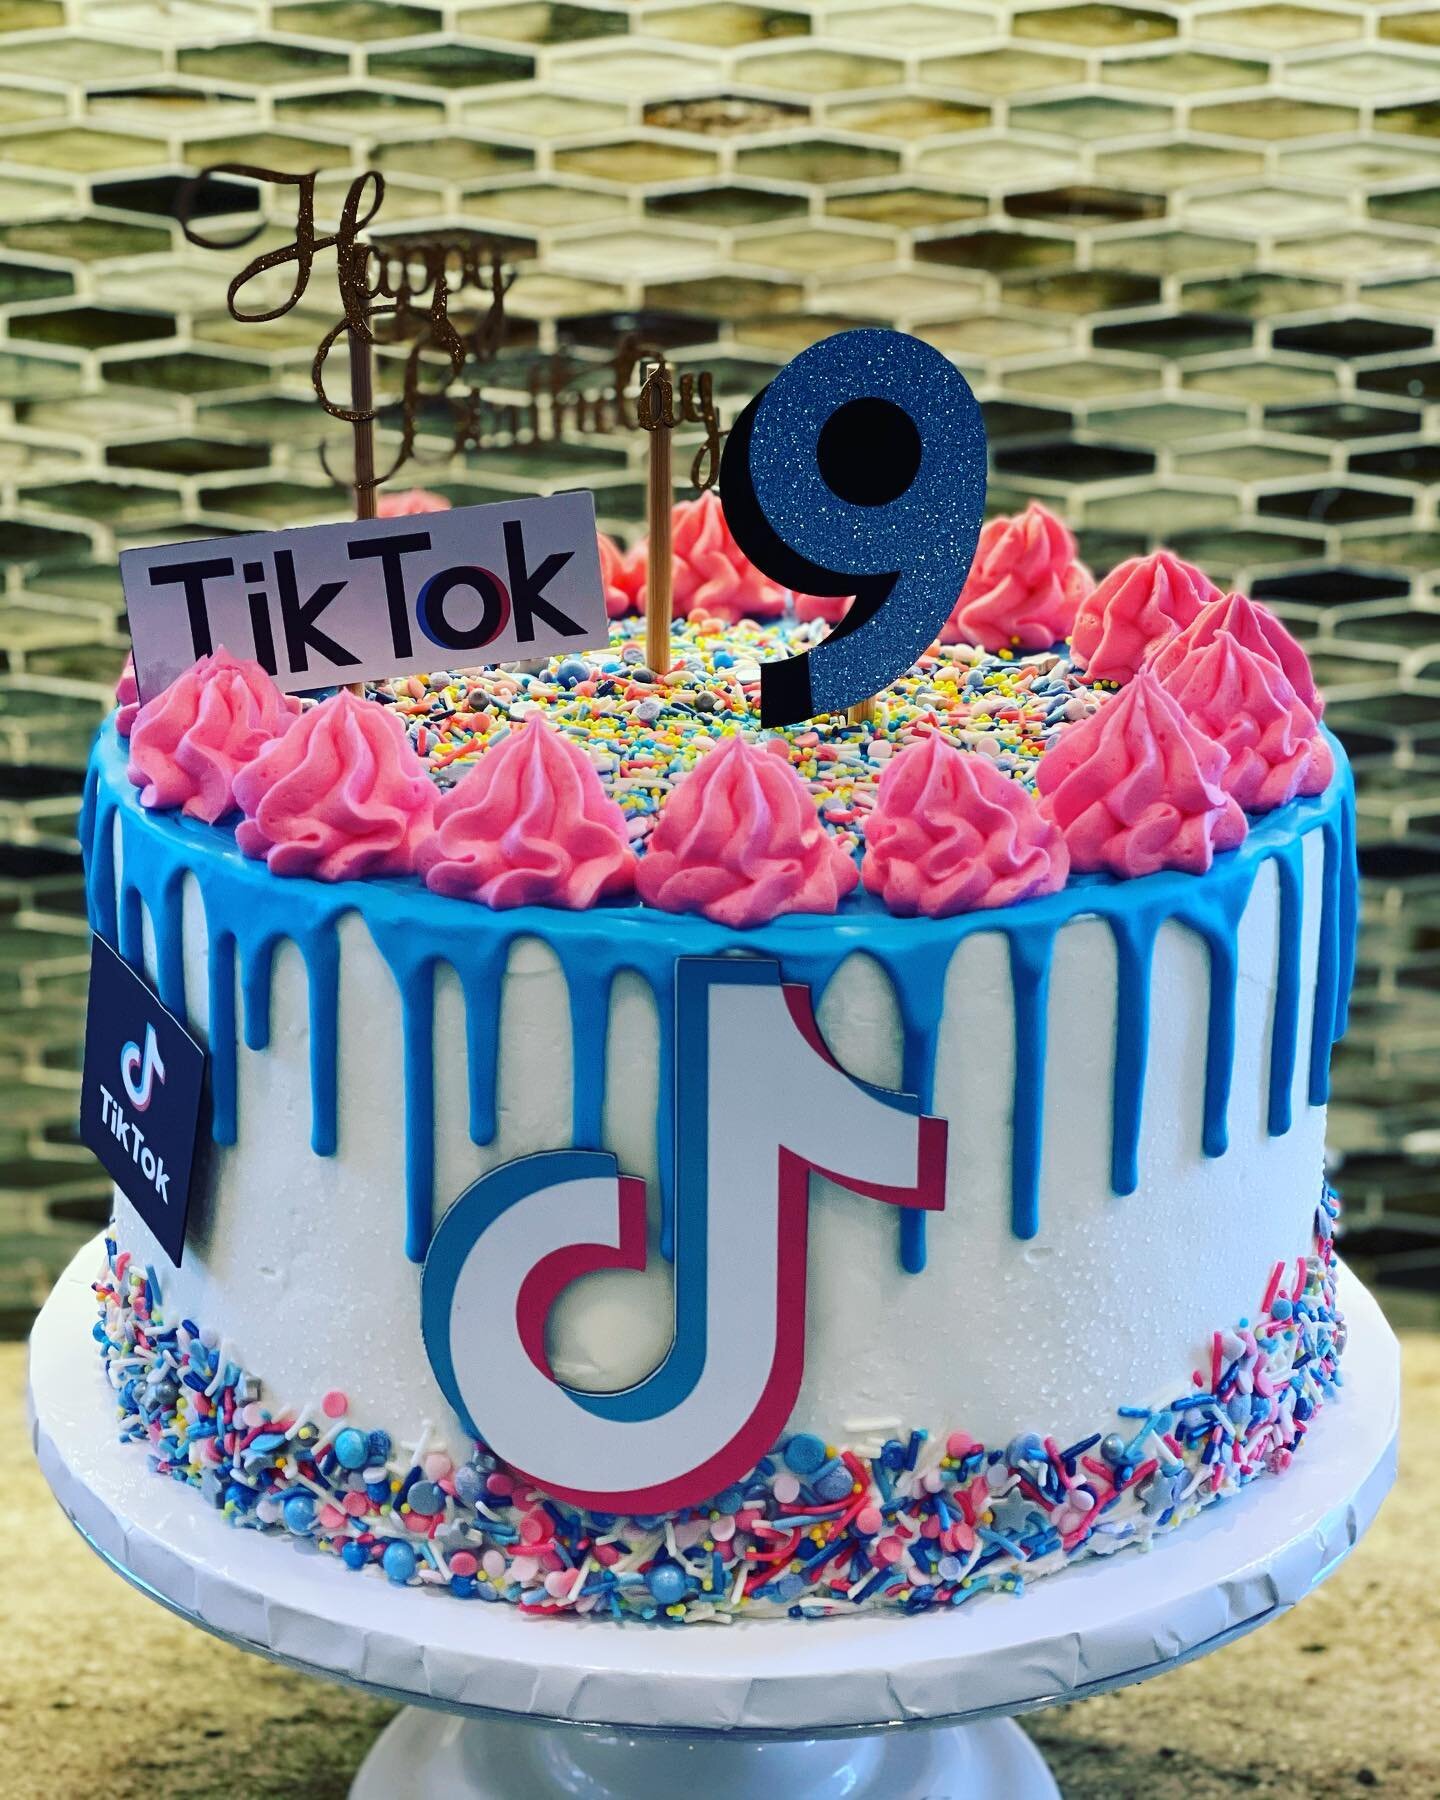 It&rsquo;s been awhile since we&rsquo;ve done a cake post! Lots of fun cakes recently, a #tictok Cake, a #koala cake, a cute cake with cool colors, a #hotfudgesundae cake, a #sunset cake. Let us make your next celebration really special with a #custo